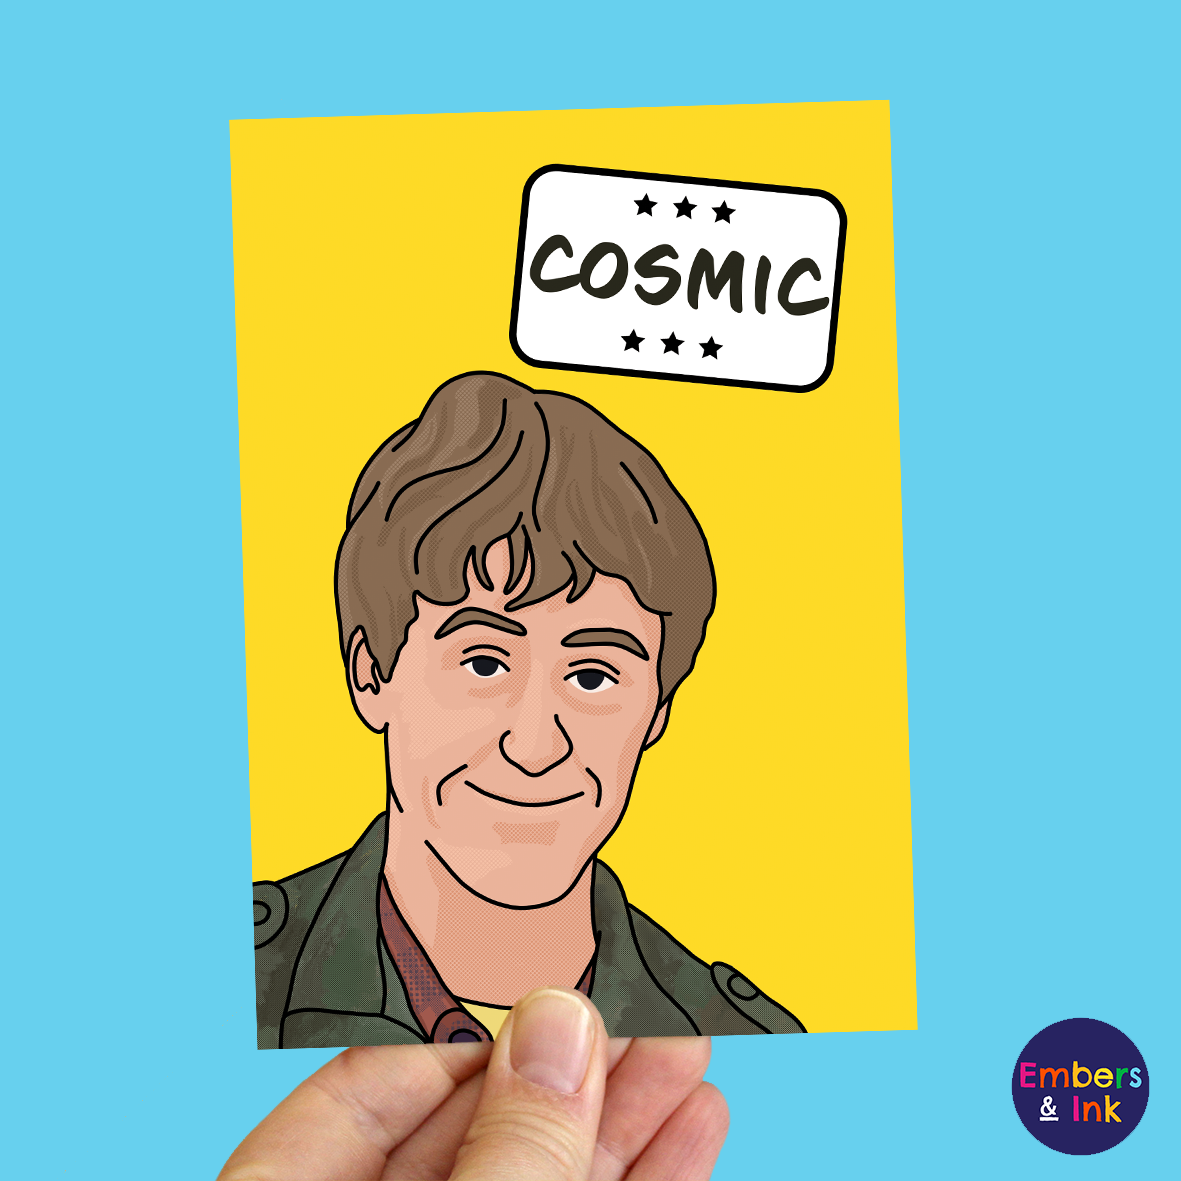 a hand holds a yellow card with an illustration of Rodney from a well known TV program underneath the word 'Cosmic' in a white box